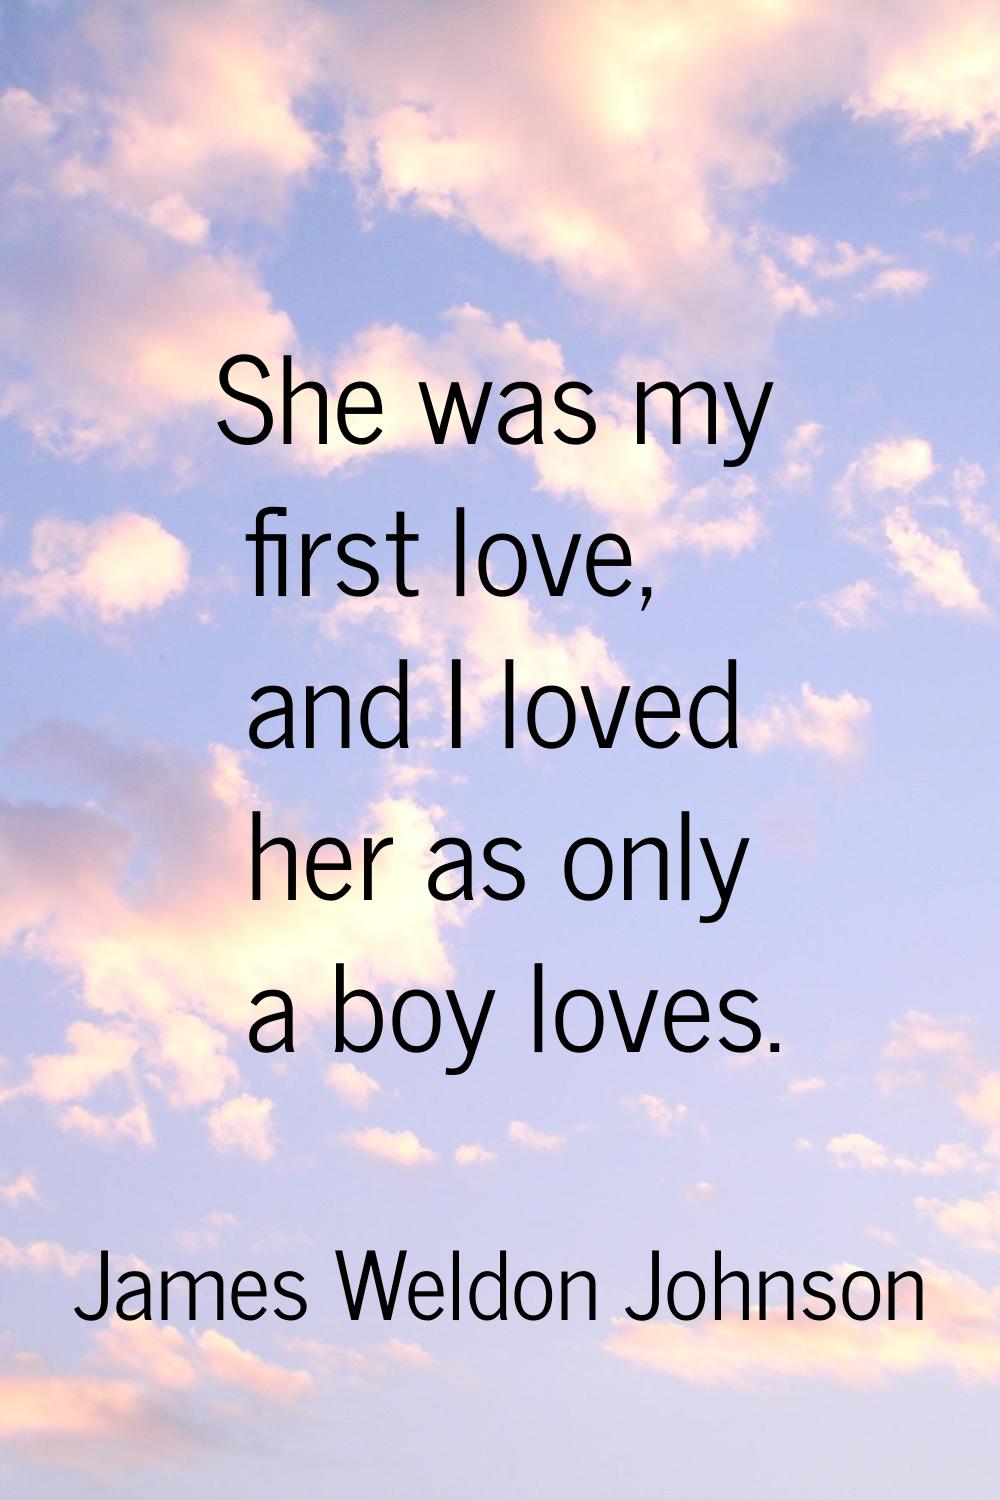 She was my first love, and I loved her as only a boy loves.